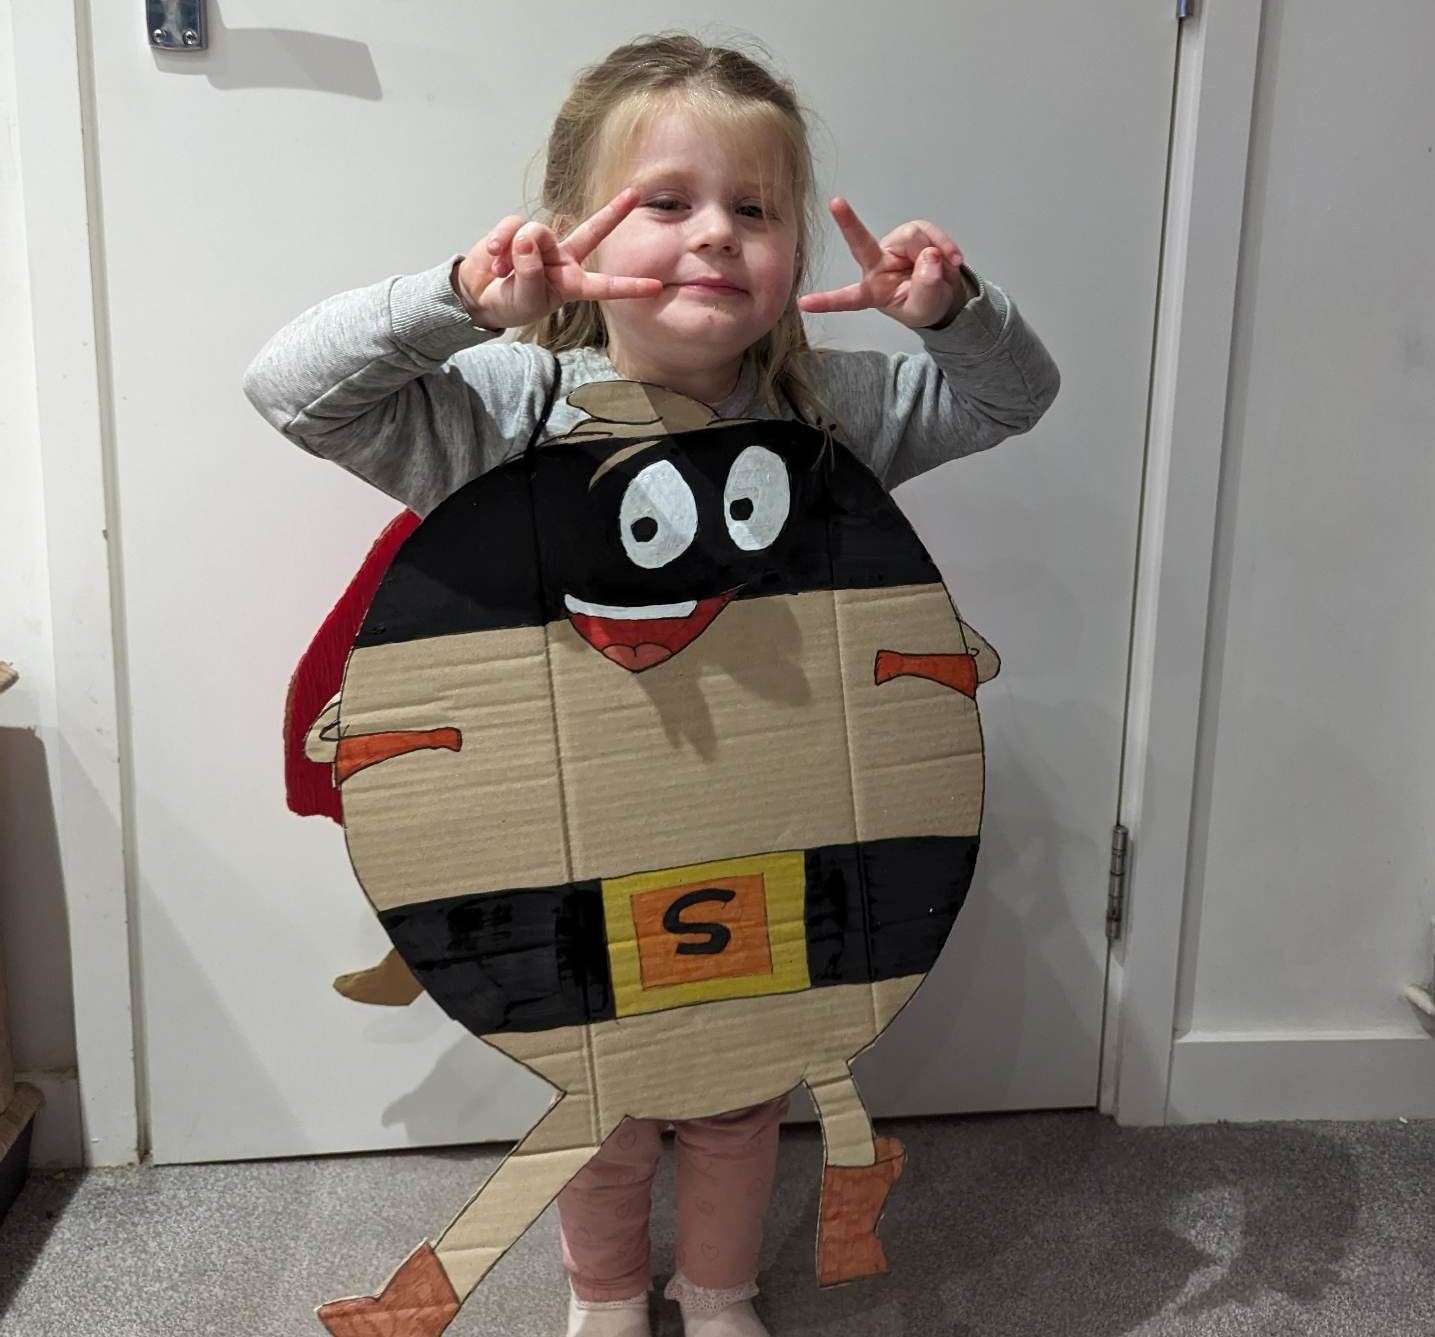 Ivie-Willow Austen, 3, dressed up as 'Supertato' for World Book Day. Picture: Cerrie Bennett